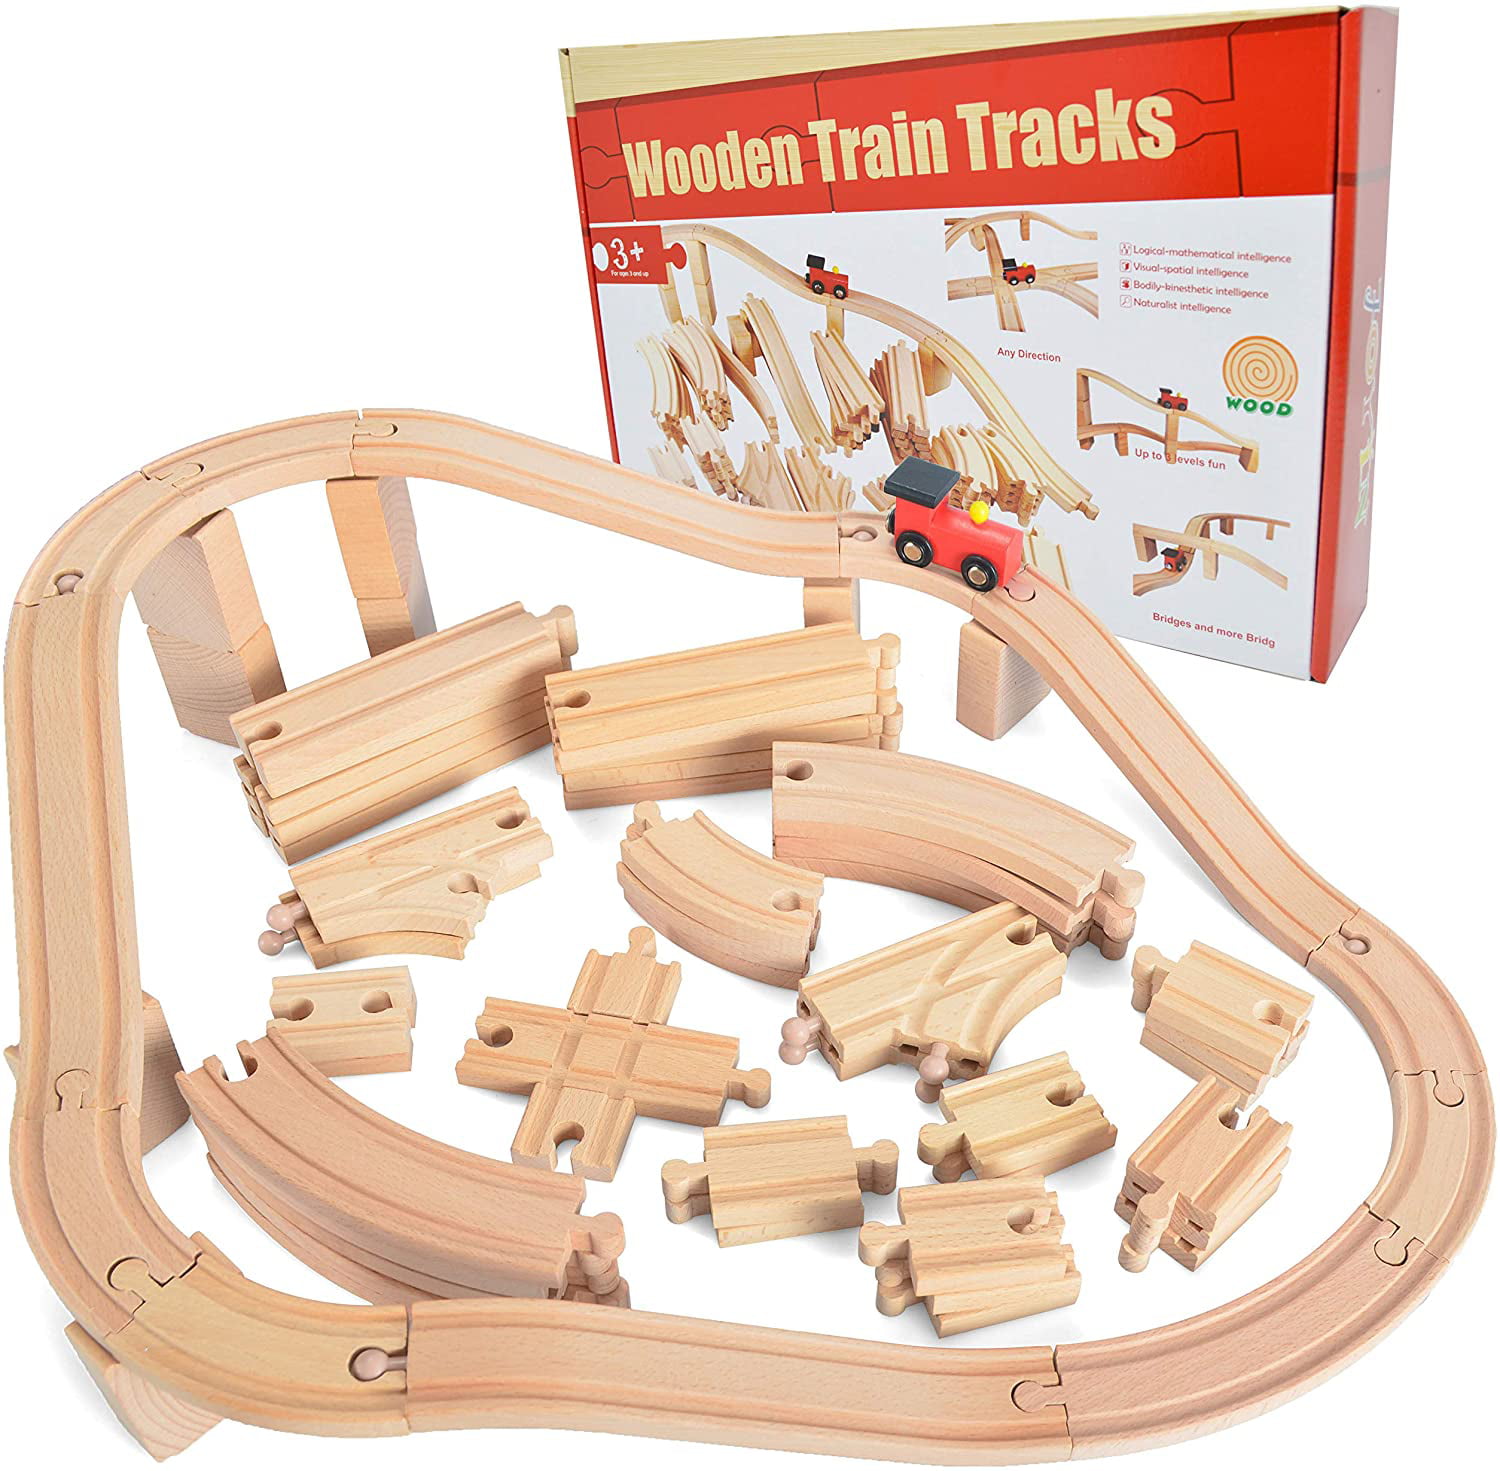 62 Pieces Wooden Train Track Expansion Set + 1 Bonus Toy Train -- NEW  Version Compatible with All Major Brands Including Thomas Battery Operated  